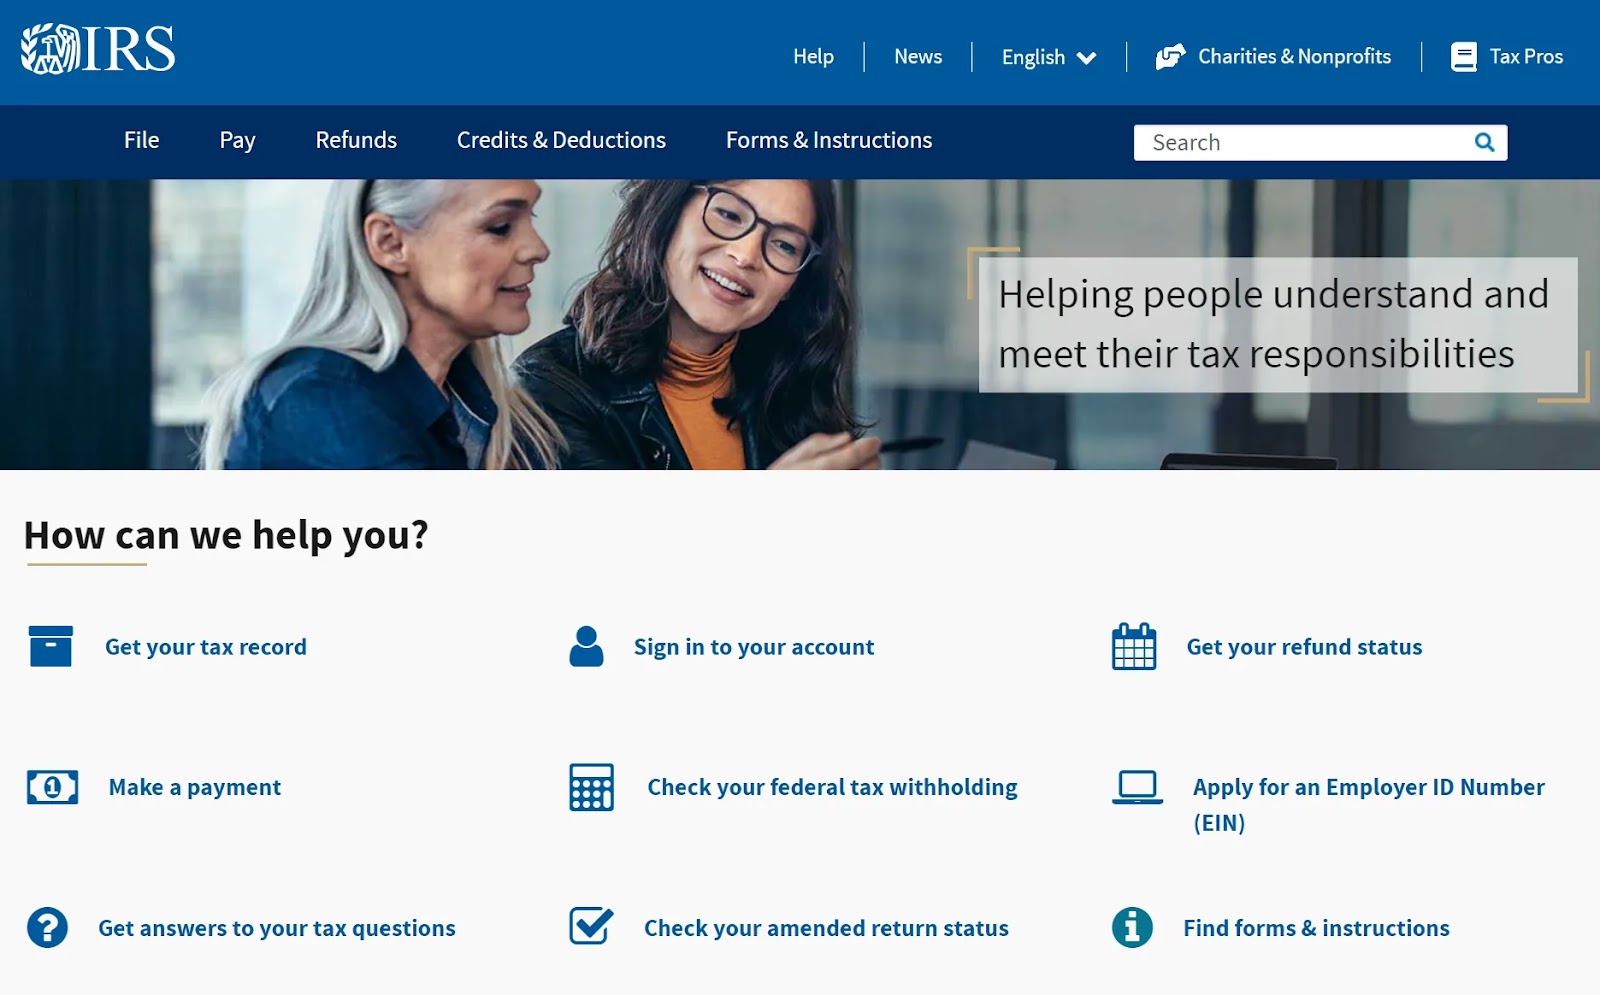 IRS's "How can we help you?" landing page